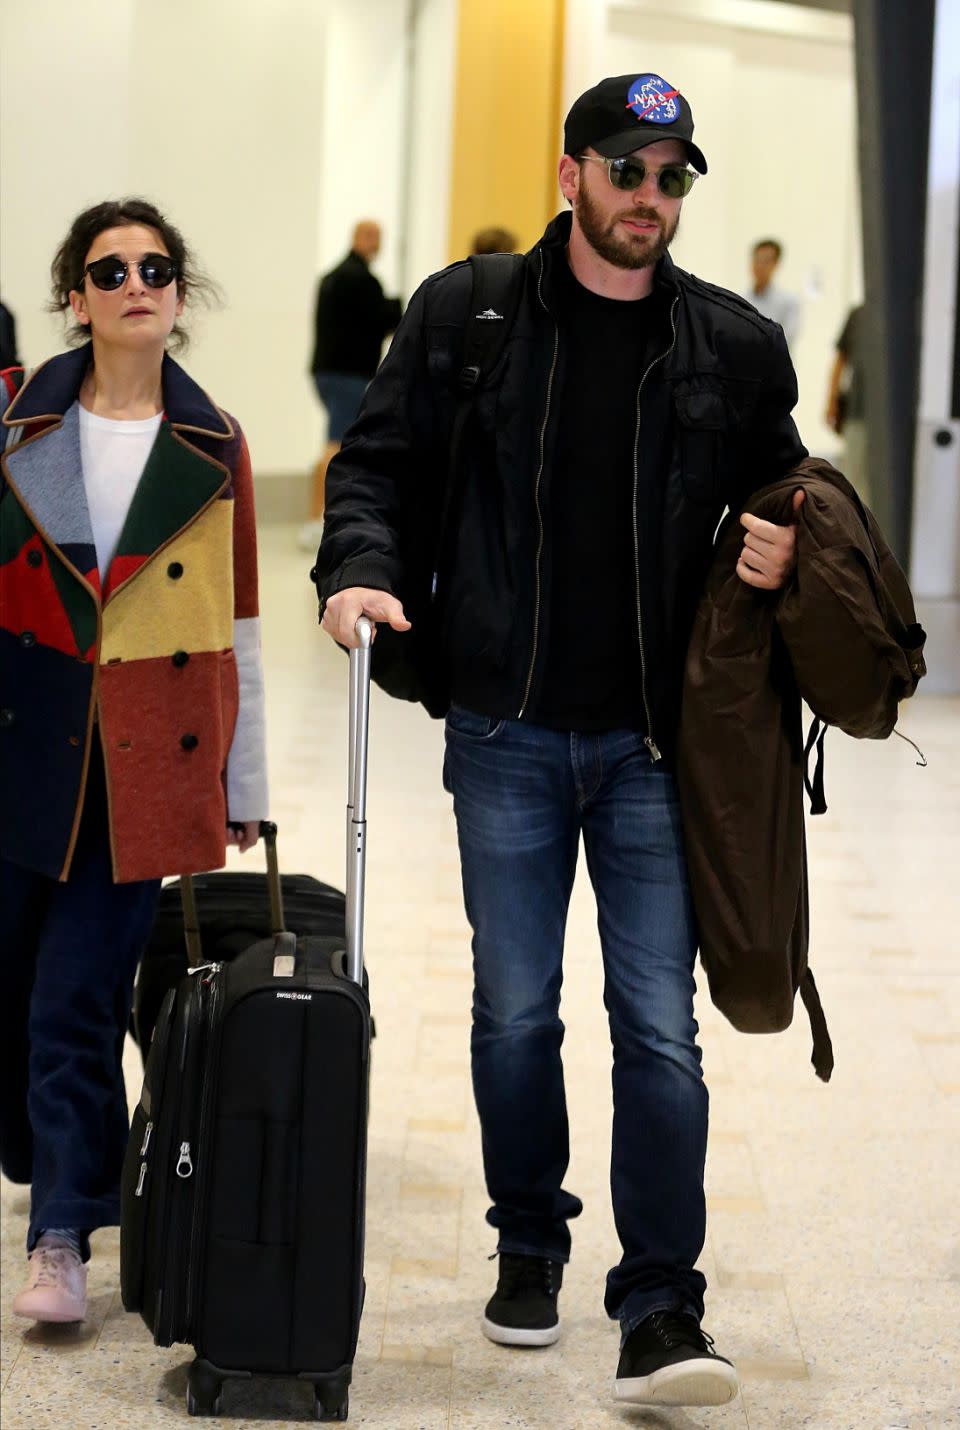 Chris and Jenny are pictured here arriving in Sydney in 2016. Source: Getty